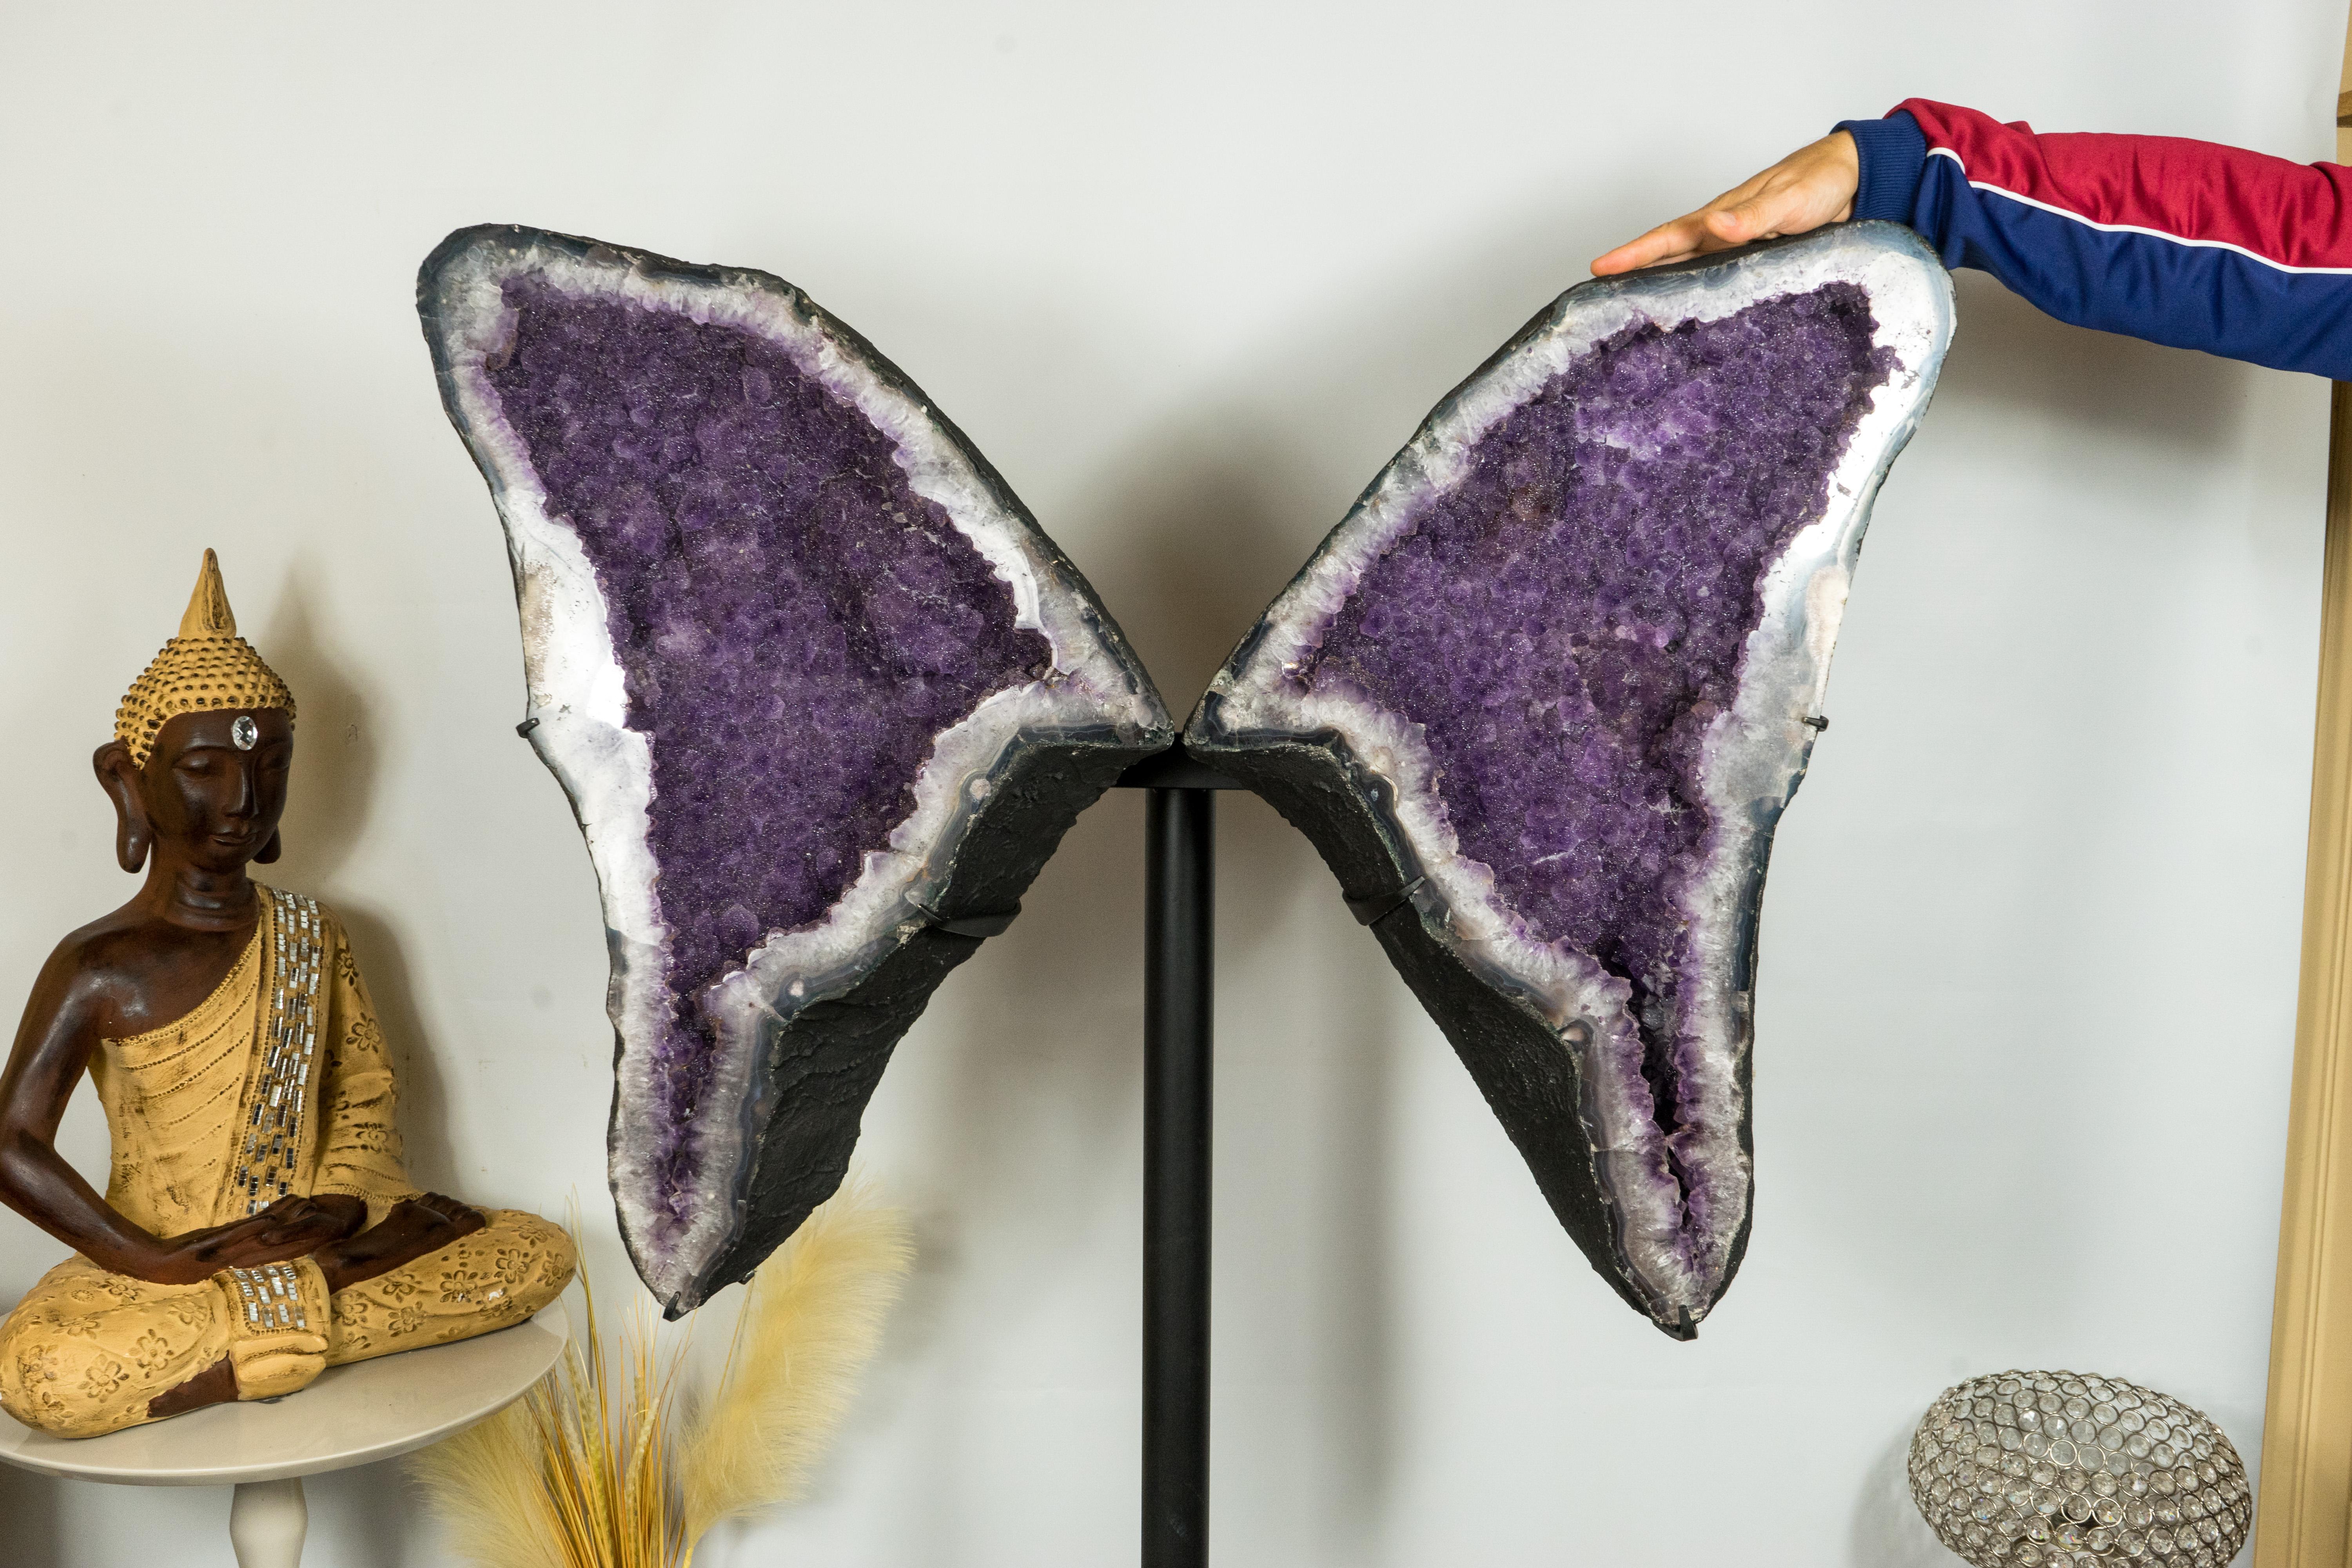 Brazilian Amethyst Butterfly Wings Geode with Rare Natural Shiny Sugar Druzy Amethyst For Sale